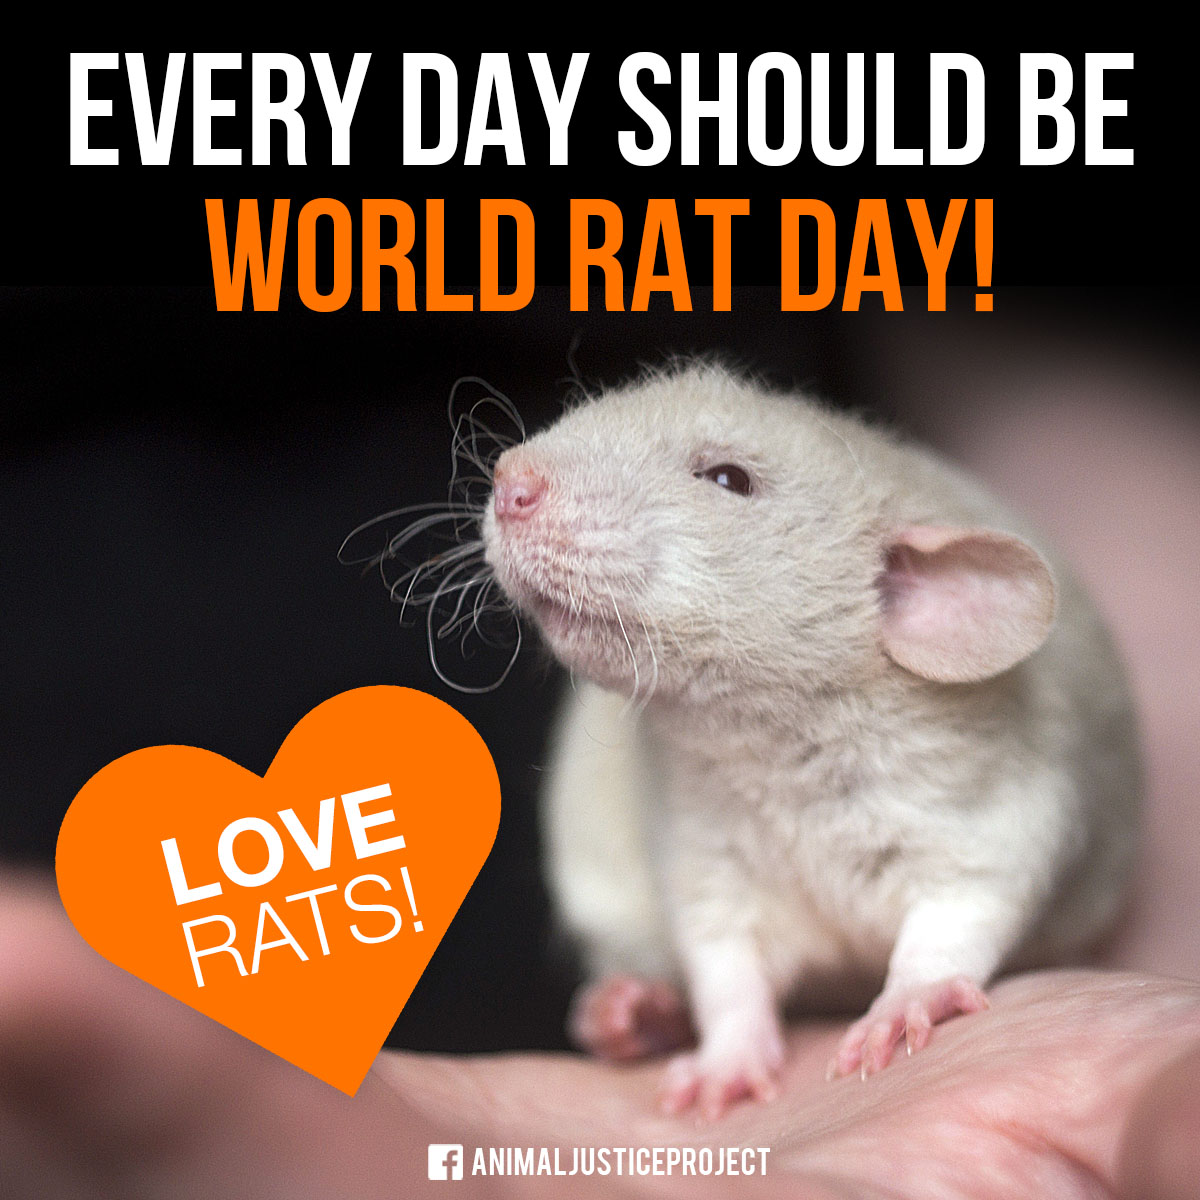 It’s World Rat Day!
Despite all the misconceptions, these individuals are, in fact friendly, caring, kind and highly intelligent. They value spending time with humans and nonhumans.

BE MORE LIKE RATS!

#WorldRatDay #Vegan #Rat #Rats #WRD2022 #WorldRatDay2022